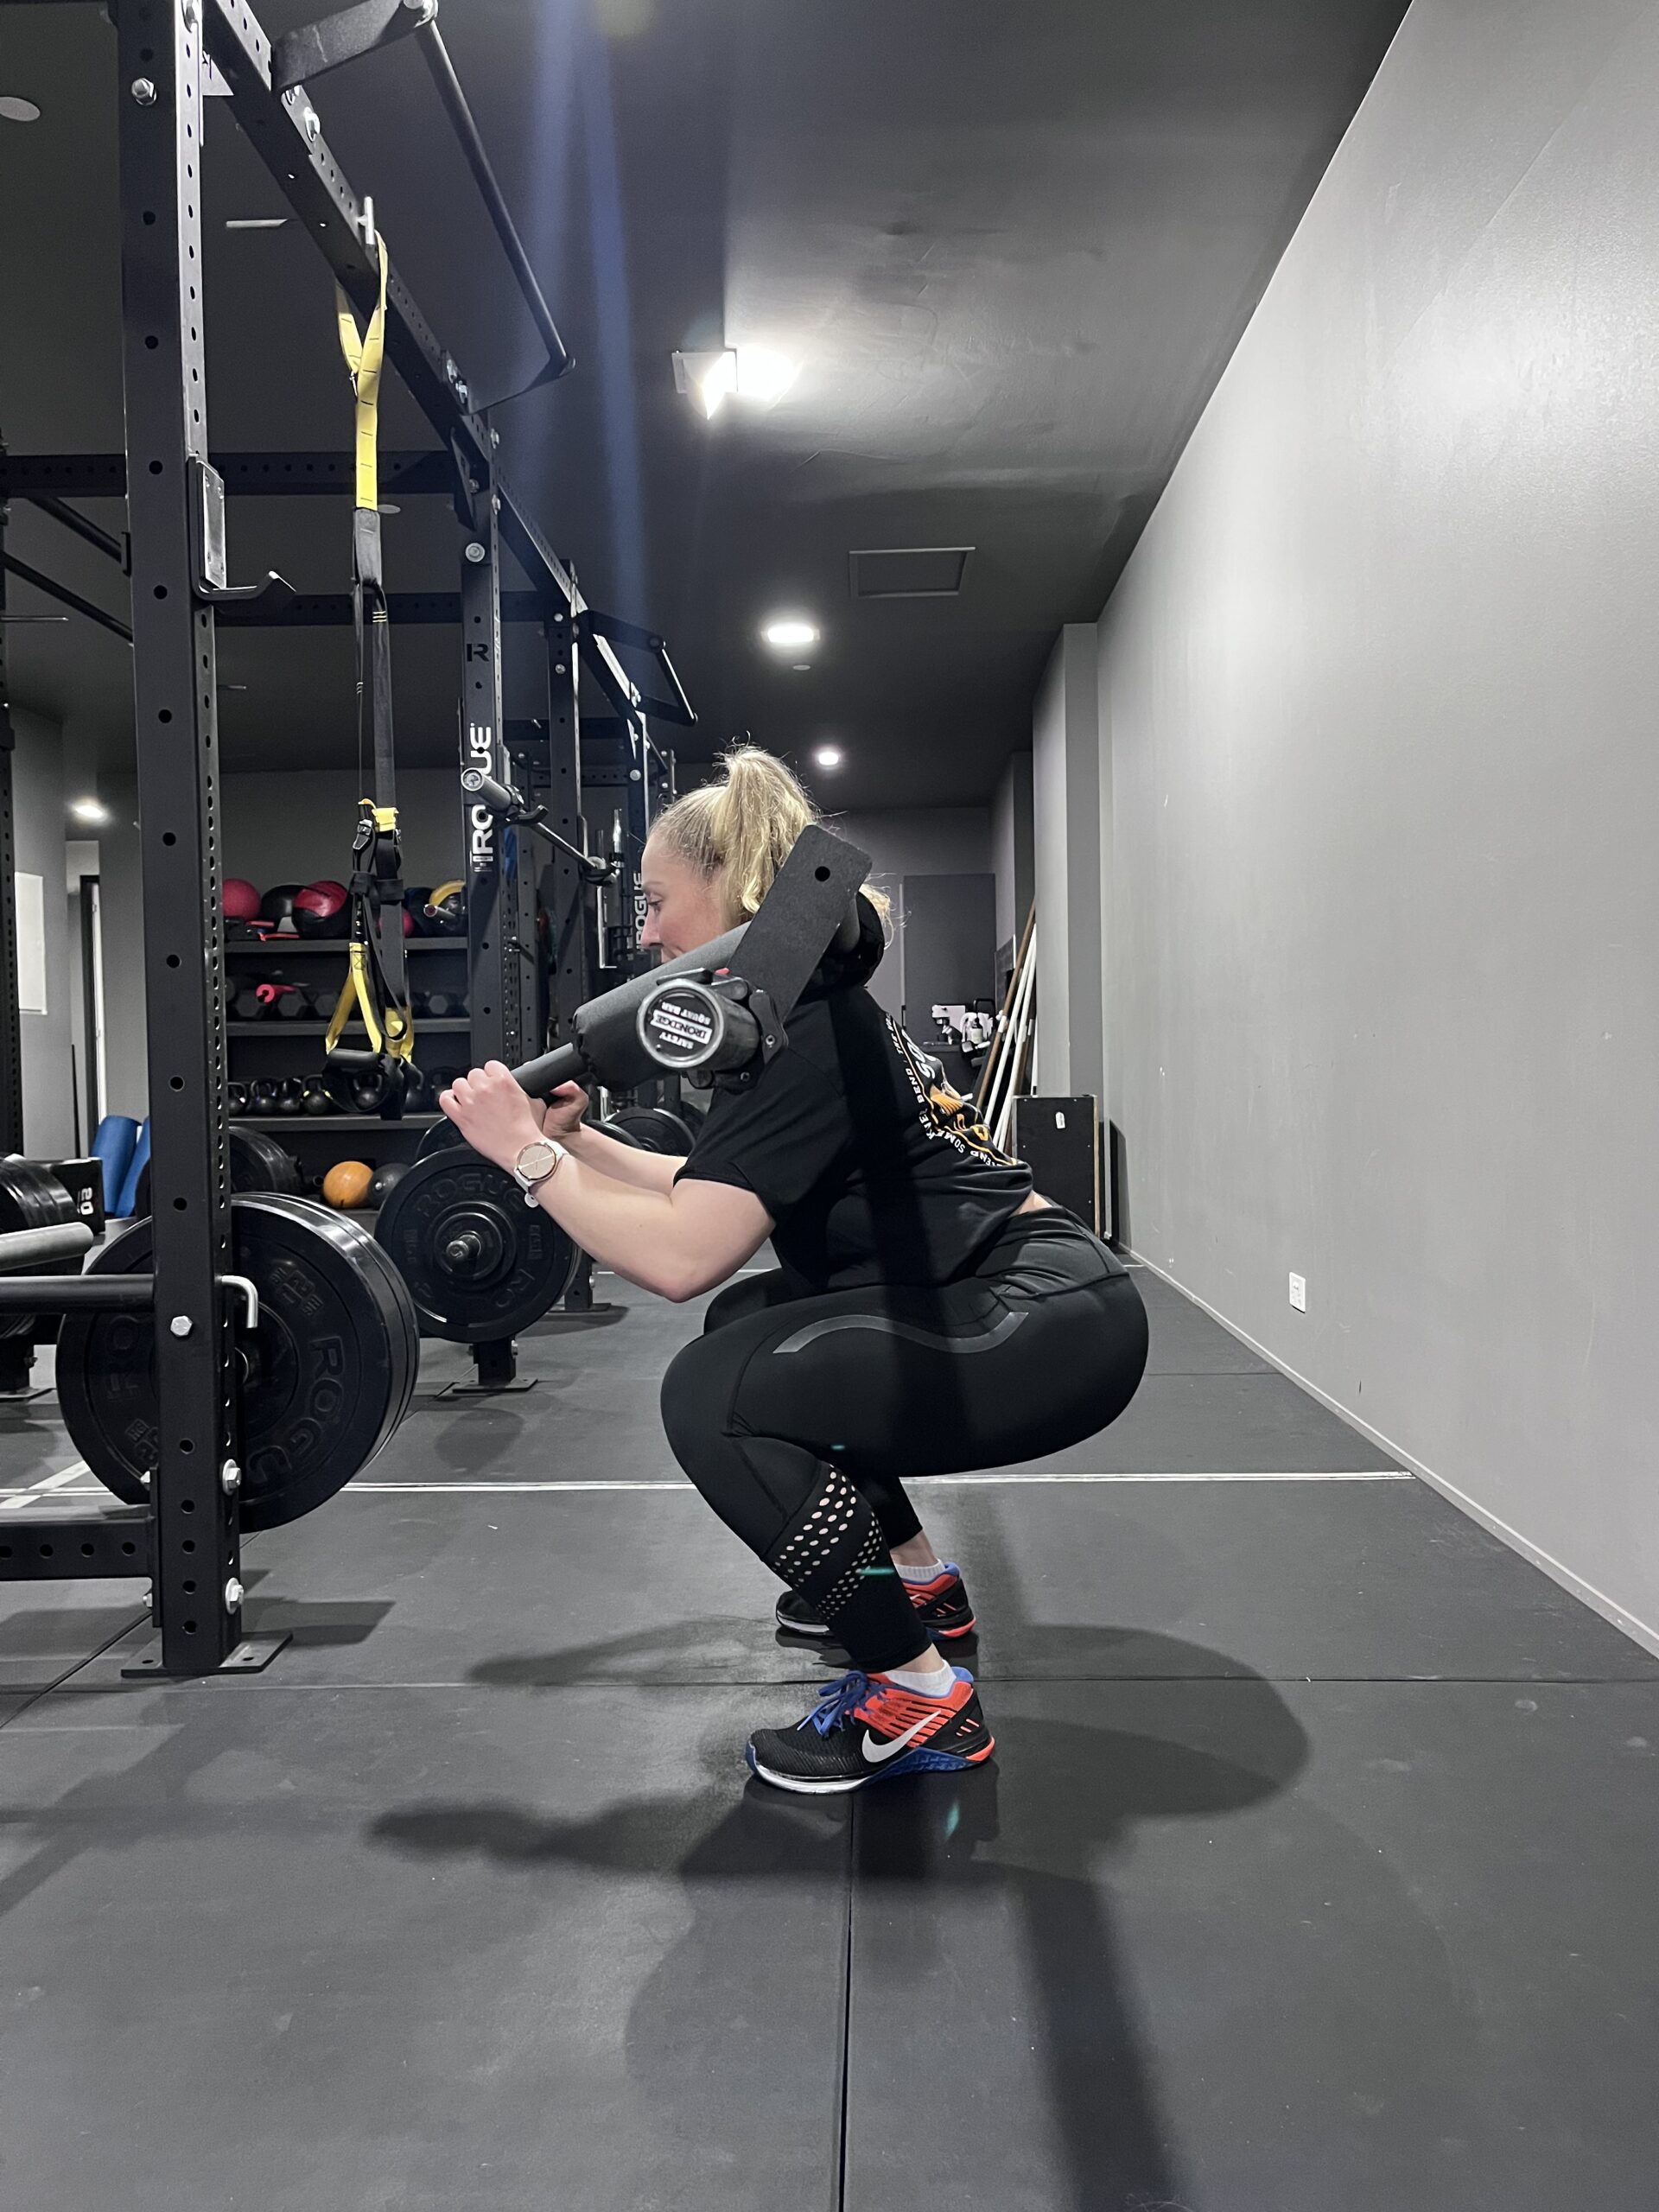 Positioning for the Safety Bar Squat